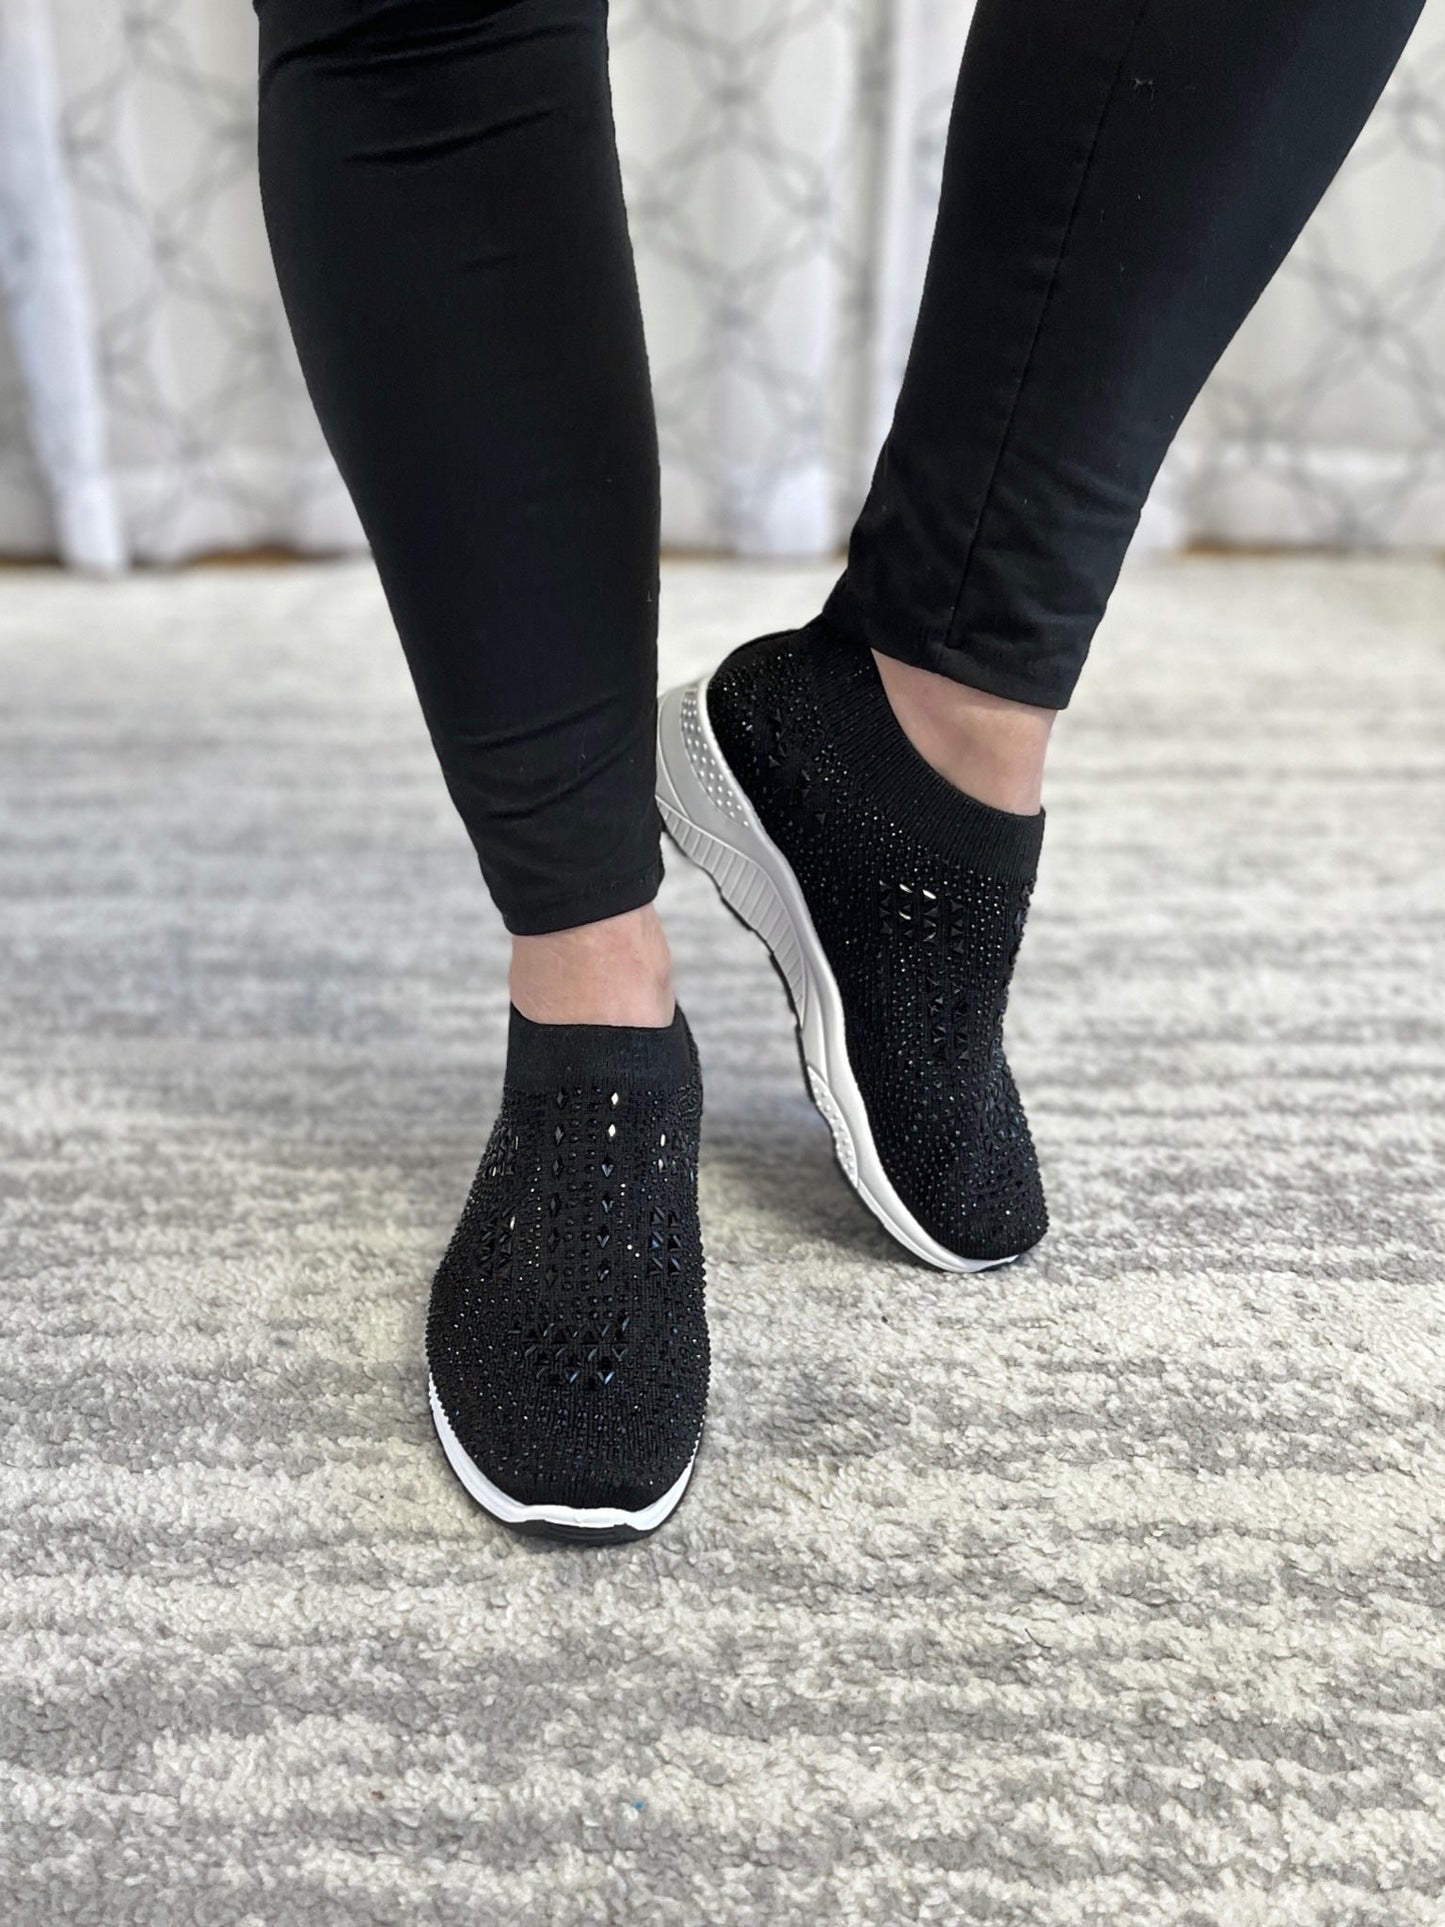 Fine and Dandy Sneakers in Black